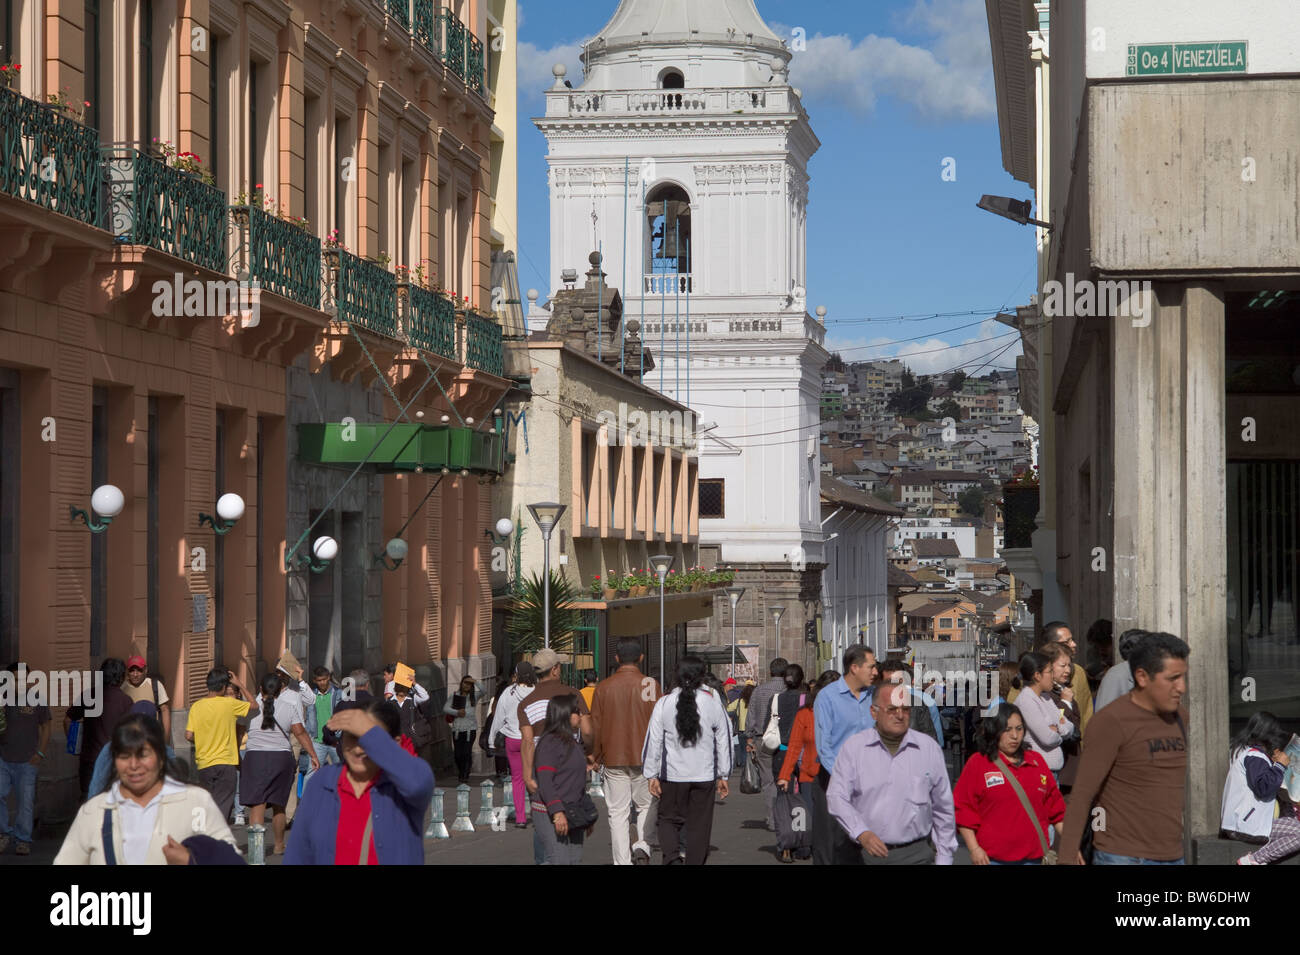 People walking on street, colonial architecture, Quito, Ecuador Stock Photo